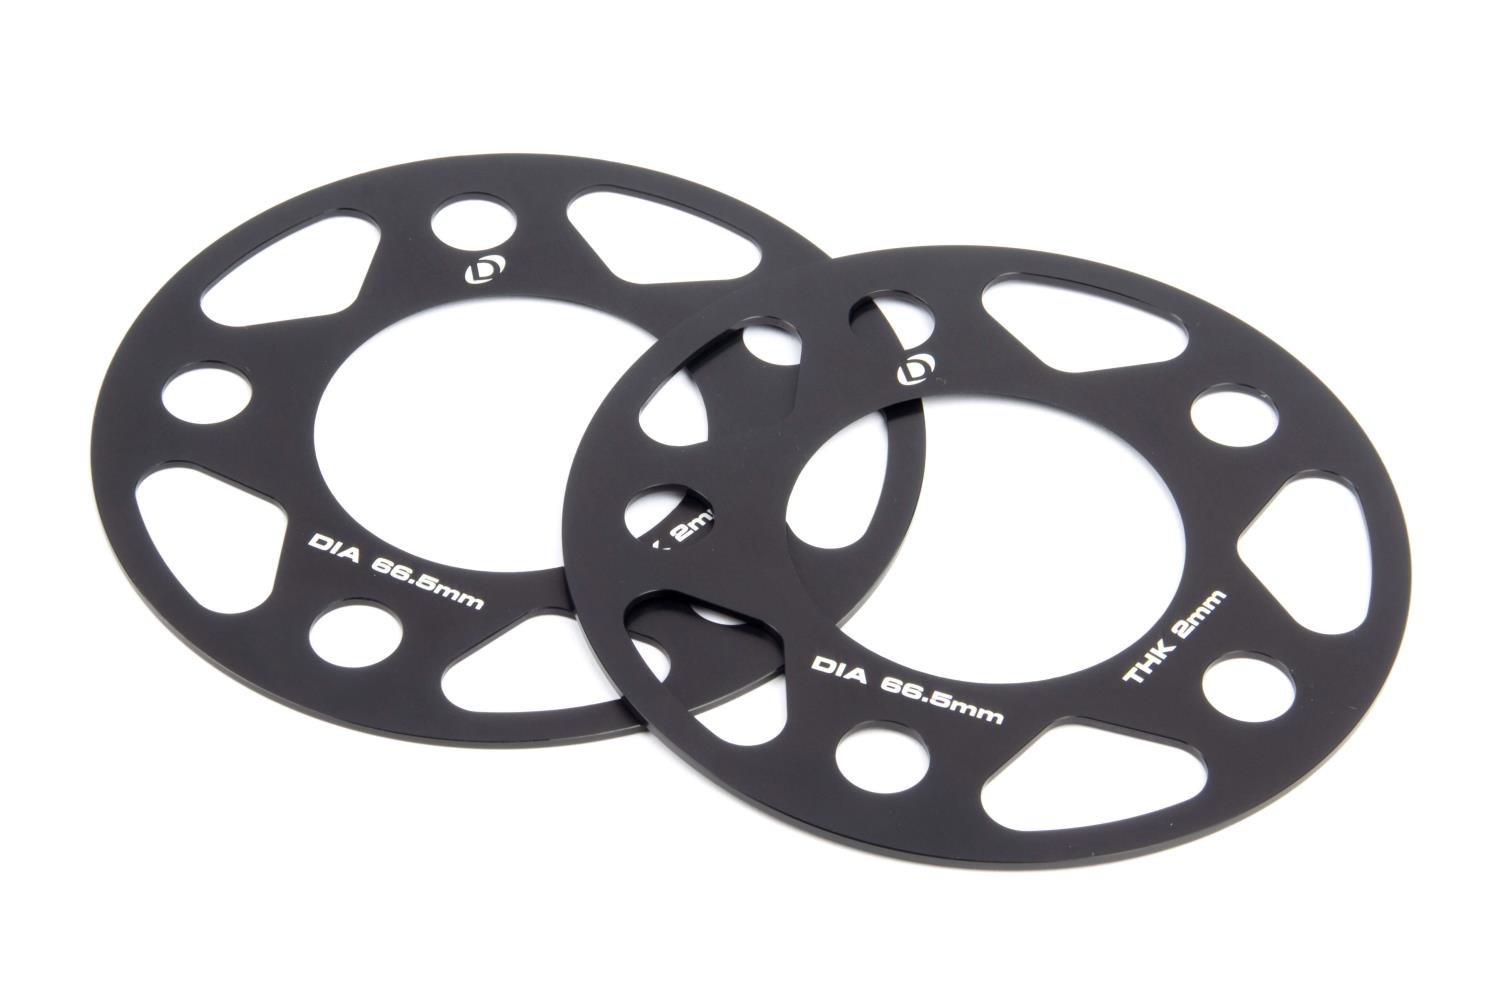 Machined Aluminum Wheel Spacers [2 mm Thick] for Select Late-Model BMW Cars/SUVs, Mini Cooper, Toyota GR Supra  [Black]